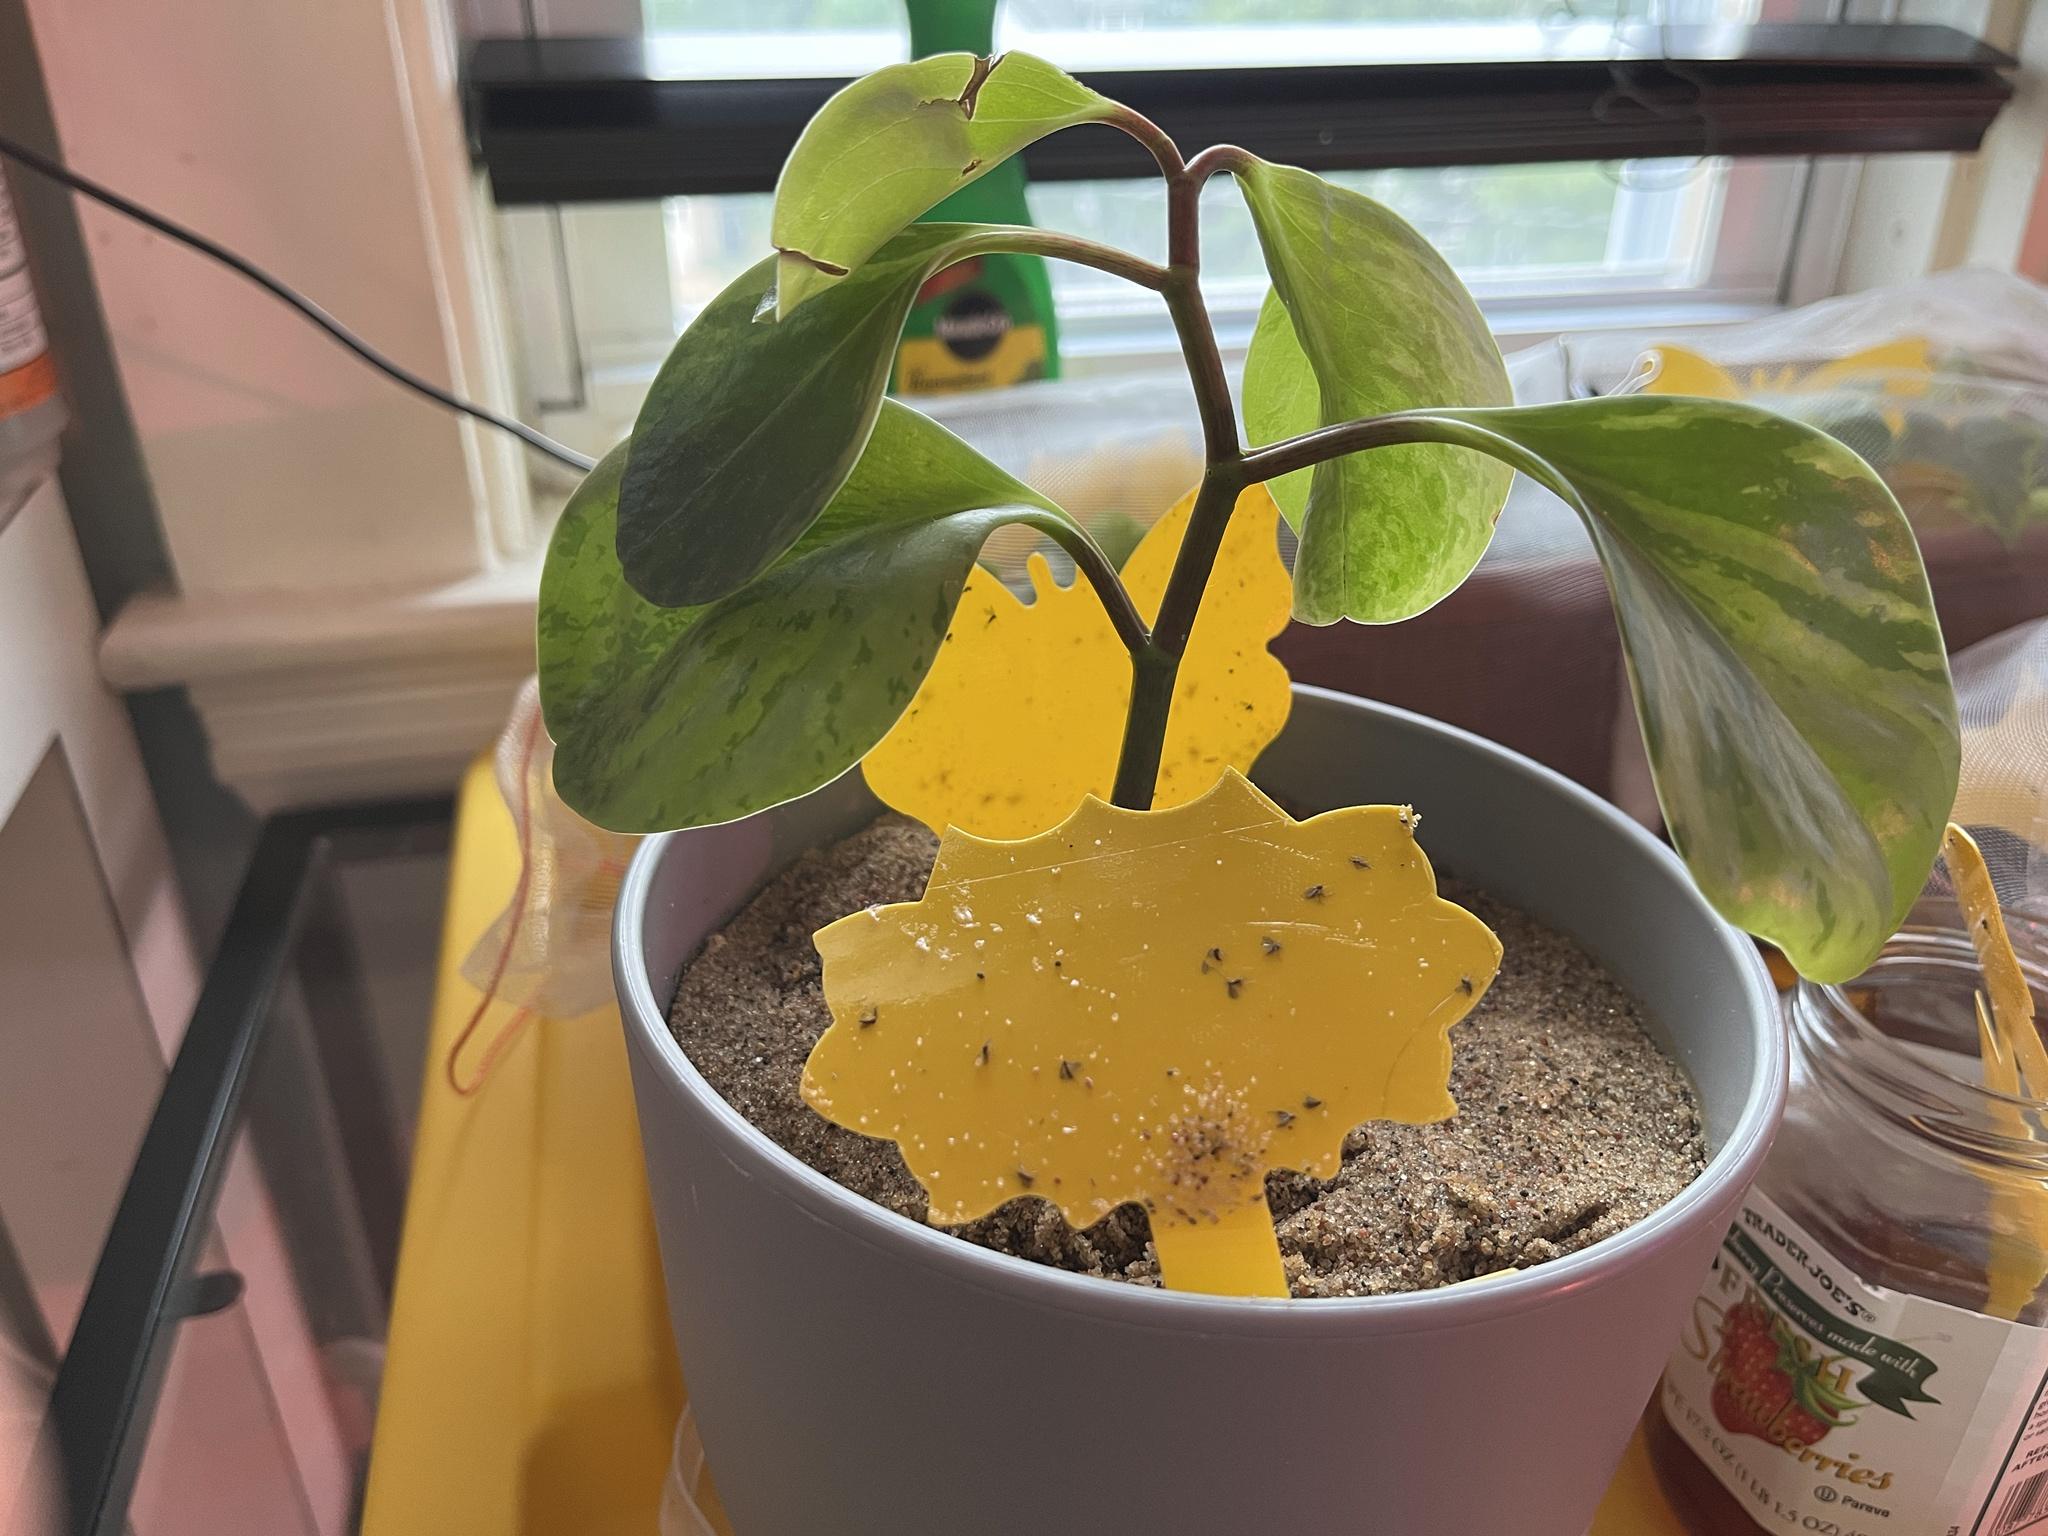 The Enormous Fungus Gnat War of 2022 appears to be over – but my plant is having a peep wonderful sad. Any manner to perk it relief up?￼